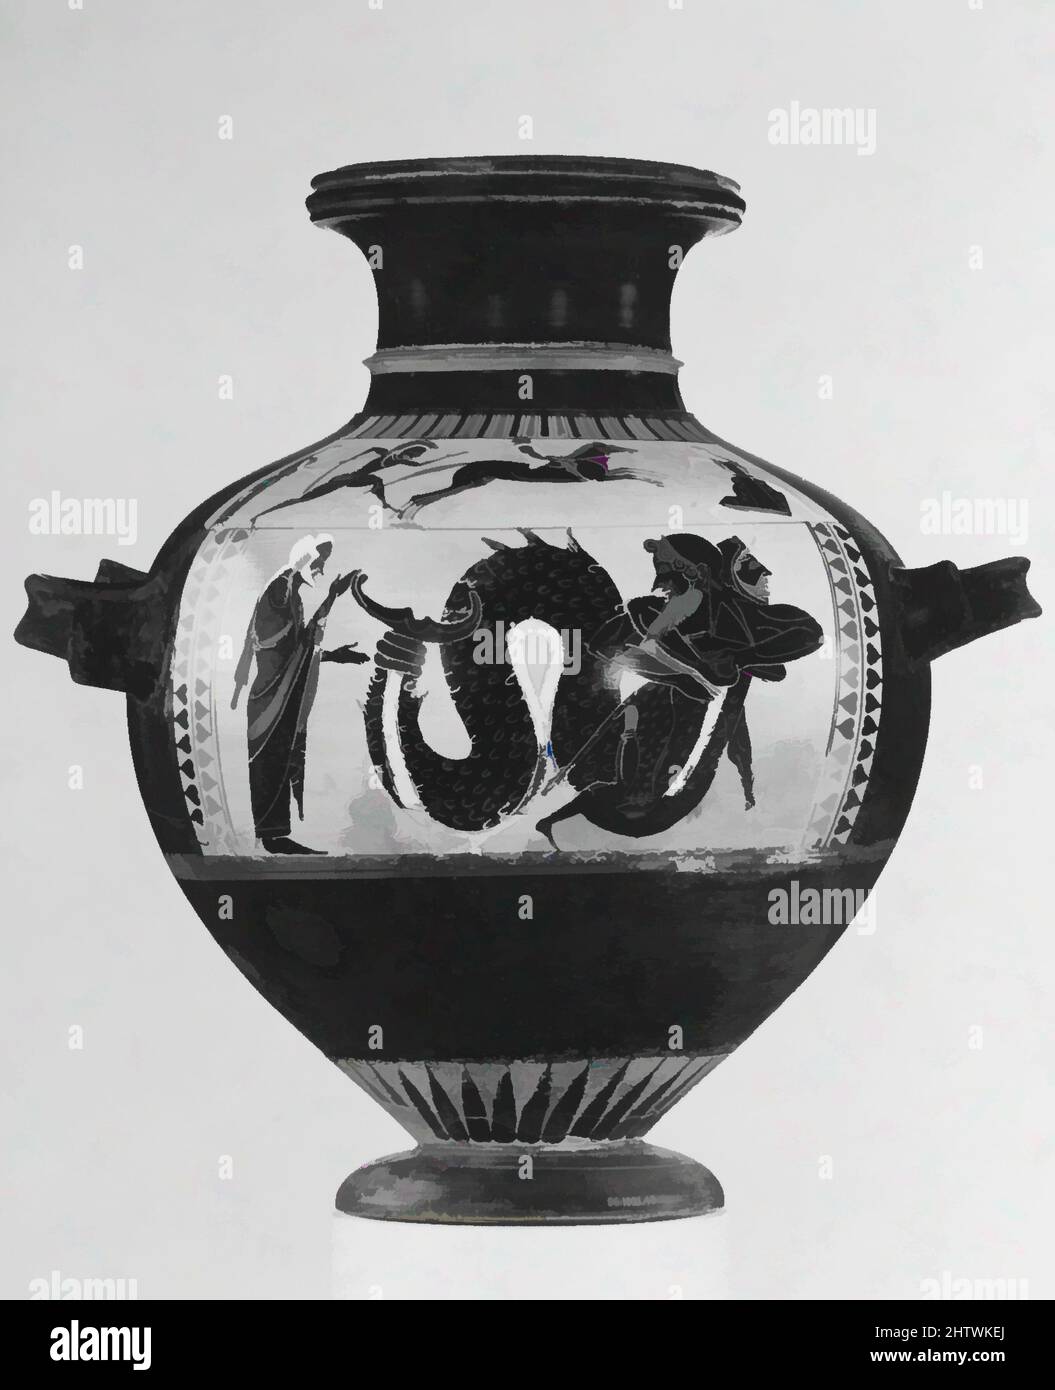 Art inspired by Terracotta hydria (water jar), Archaic, ca. 560–550 B.C., Greek, Attic, Terracotta; black-figure, H. 13 1/8 in. (33.3 cm), Vases, On the body, Herakles wrestling Triton, On the shoulder, Achilles pursuing Troilos. Herakles wrestling Triton is a recurrent subject, Classic works modernized by Artotop with a splash of modernity. Shapes, color and value, eye-catching visual impact on art. Emotions through freedom of artworks in a contemporary way. A timeless message pursuing a wildly creative new direction. Artists turning to the digital medium and creating the Artotop NFT Stock Photo